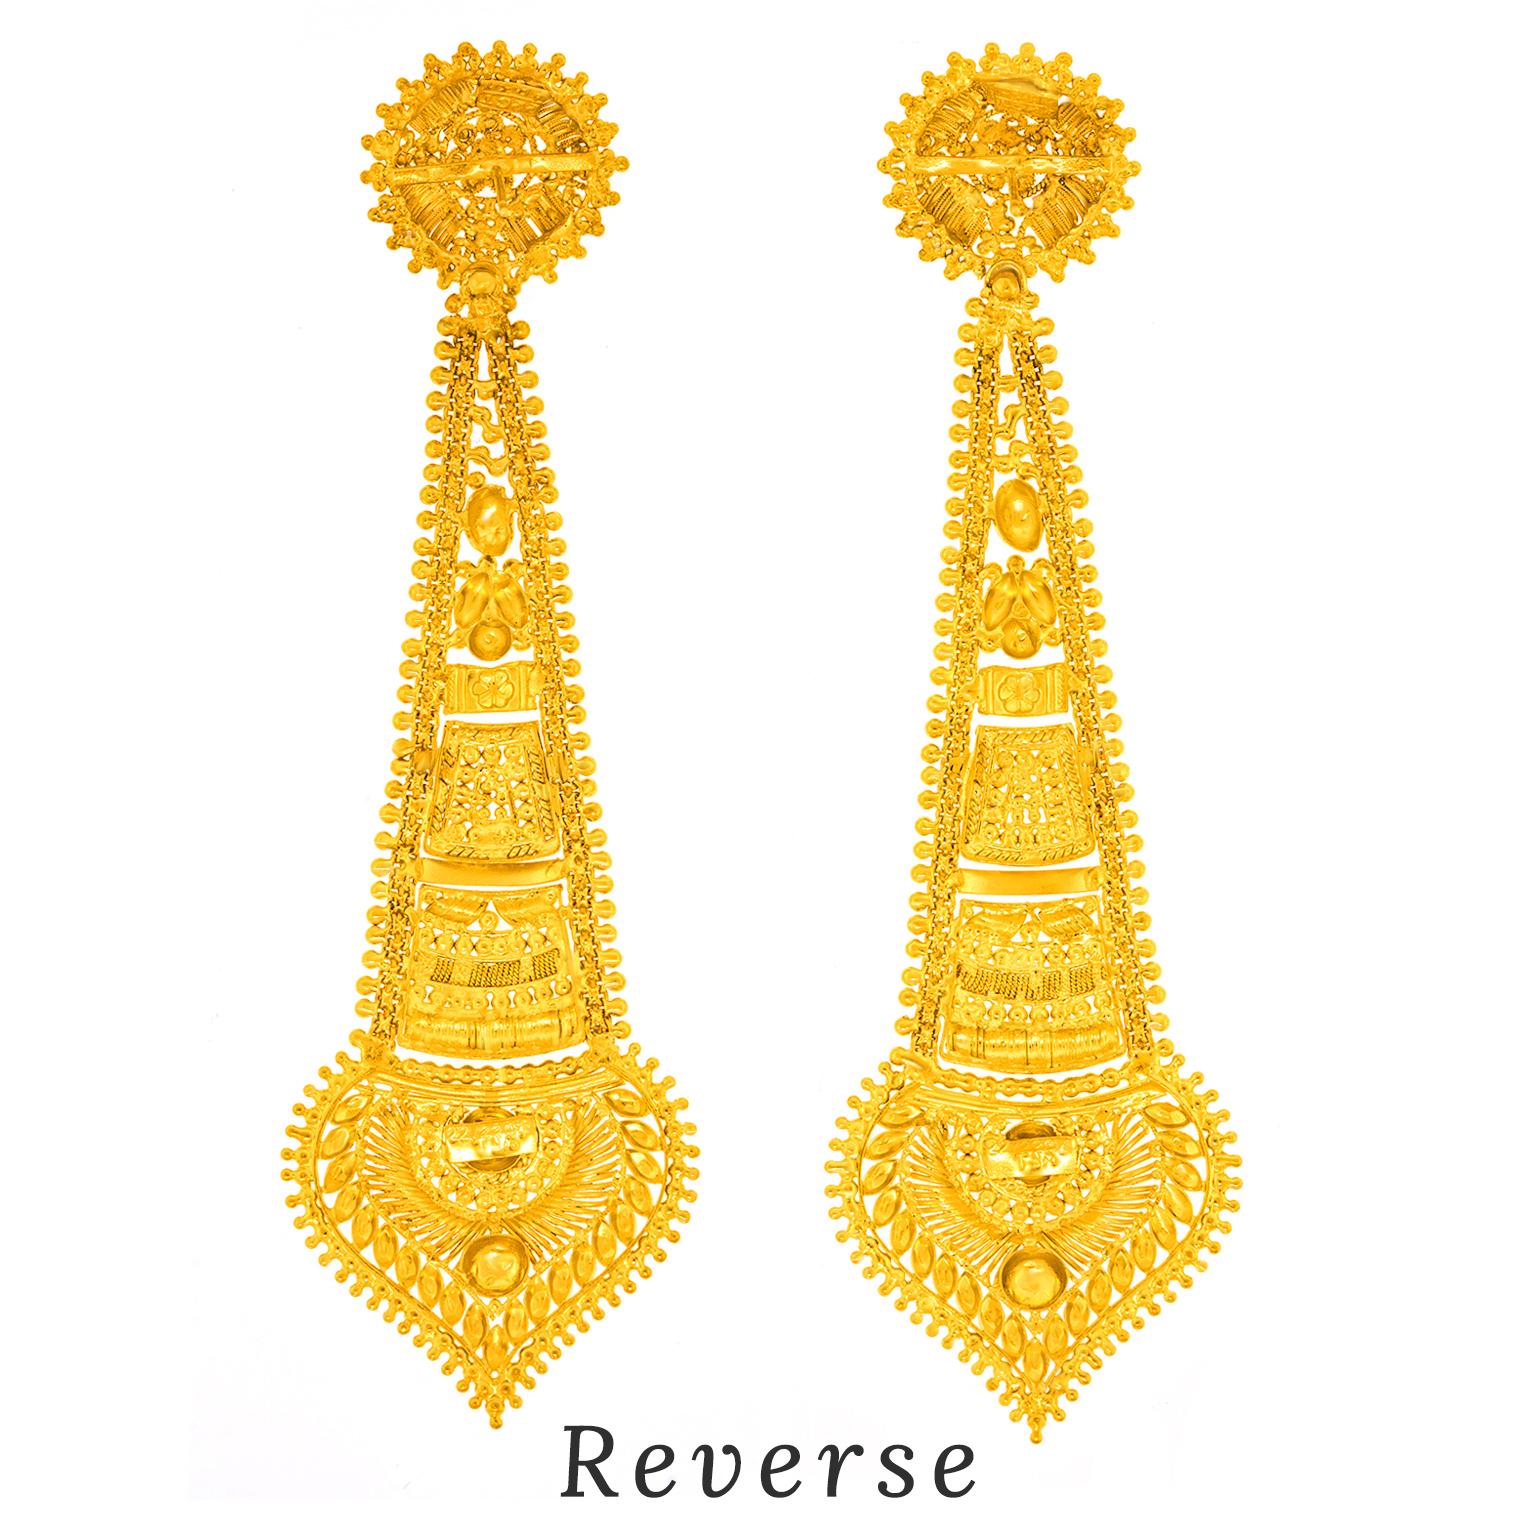 Magnificent High-Karat Gold Earrings c1950s India For Sale 5